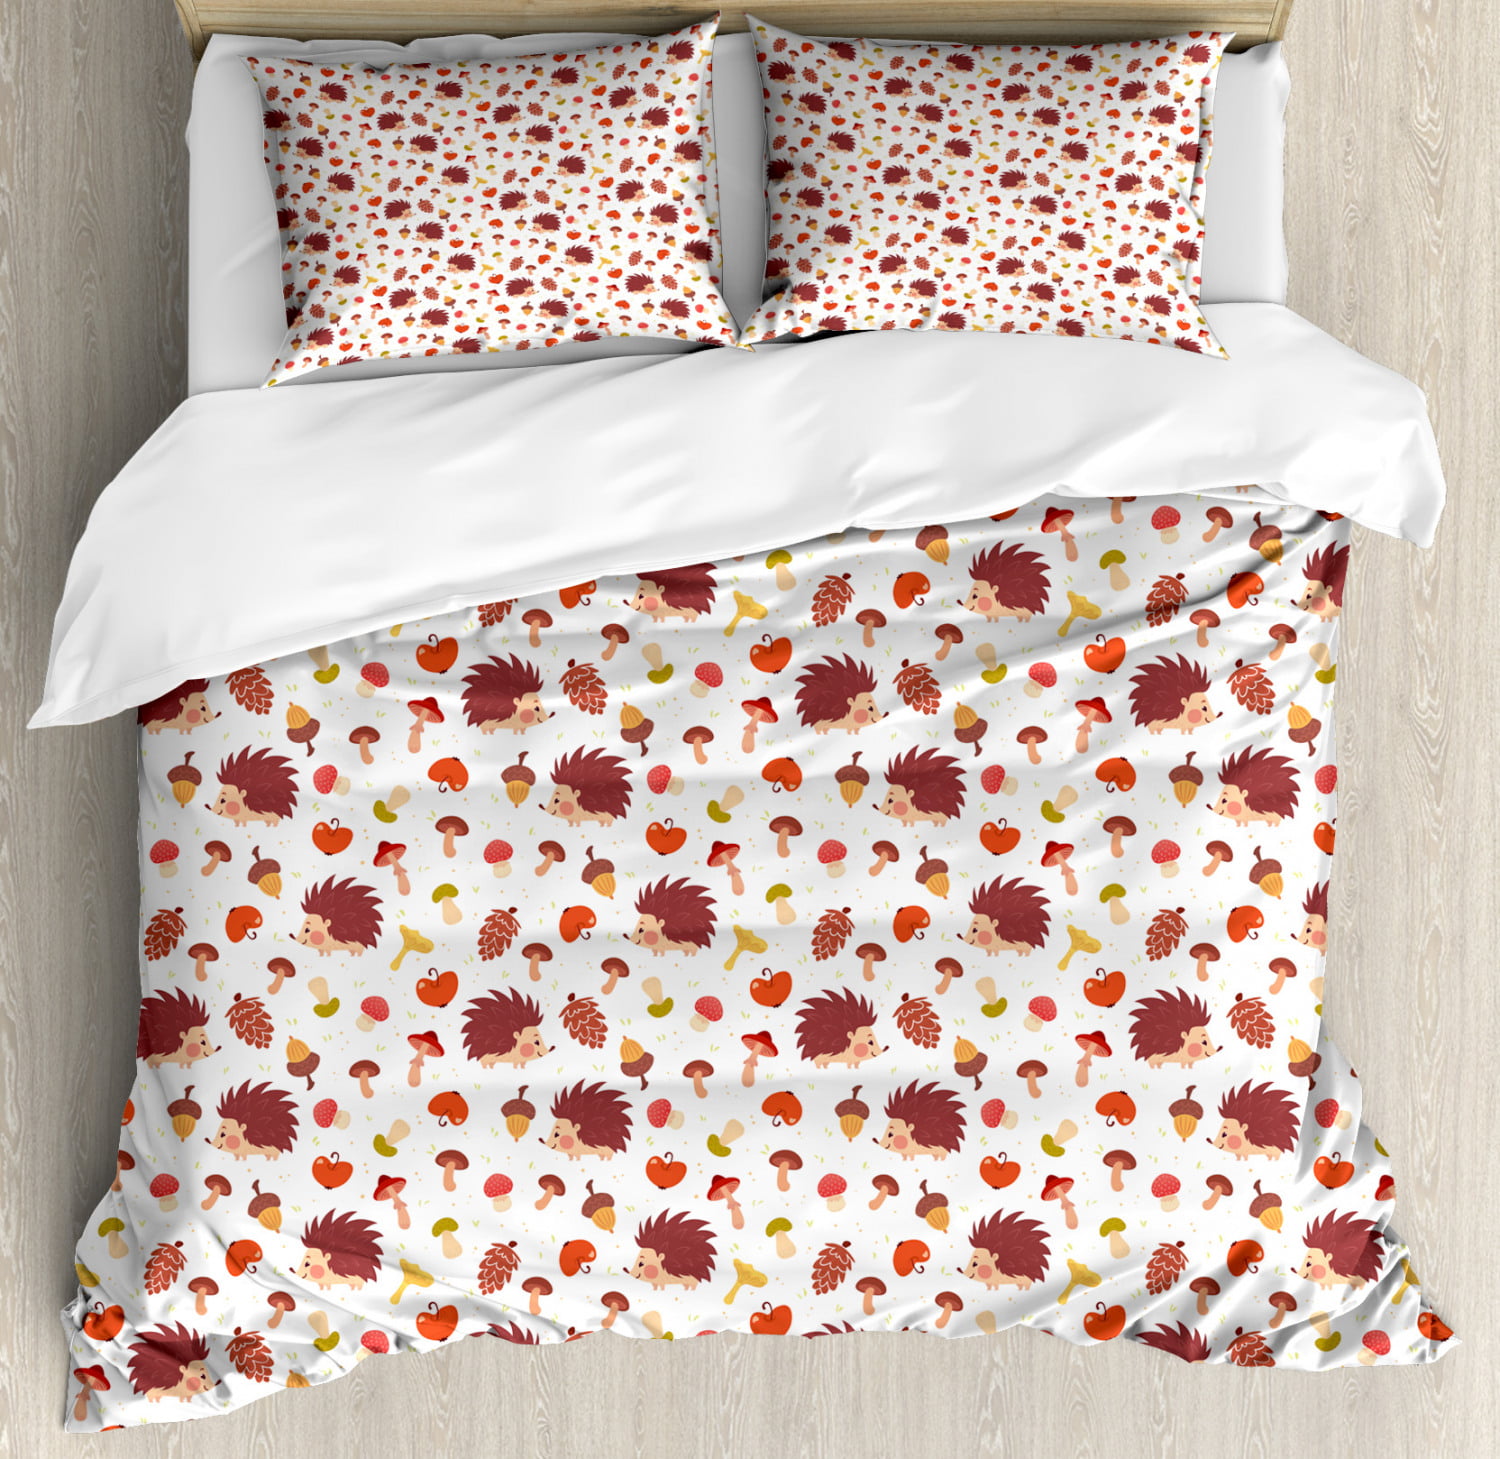 Mushroom Duvet Cover Set Cute Autumn Inspired Pattern With